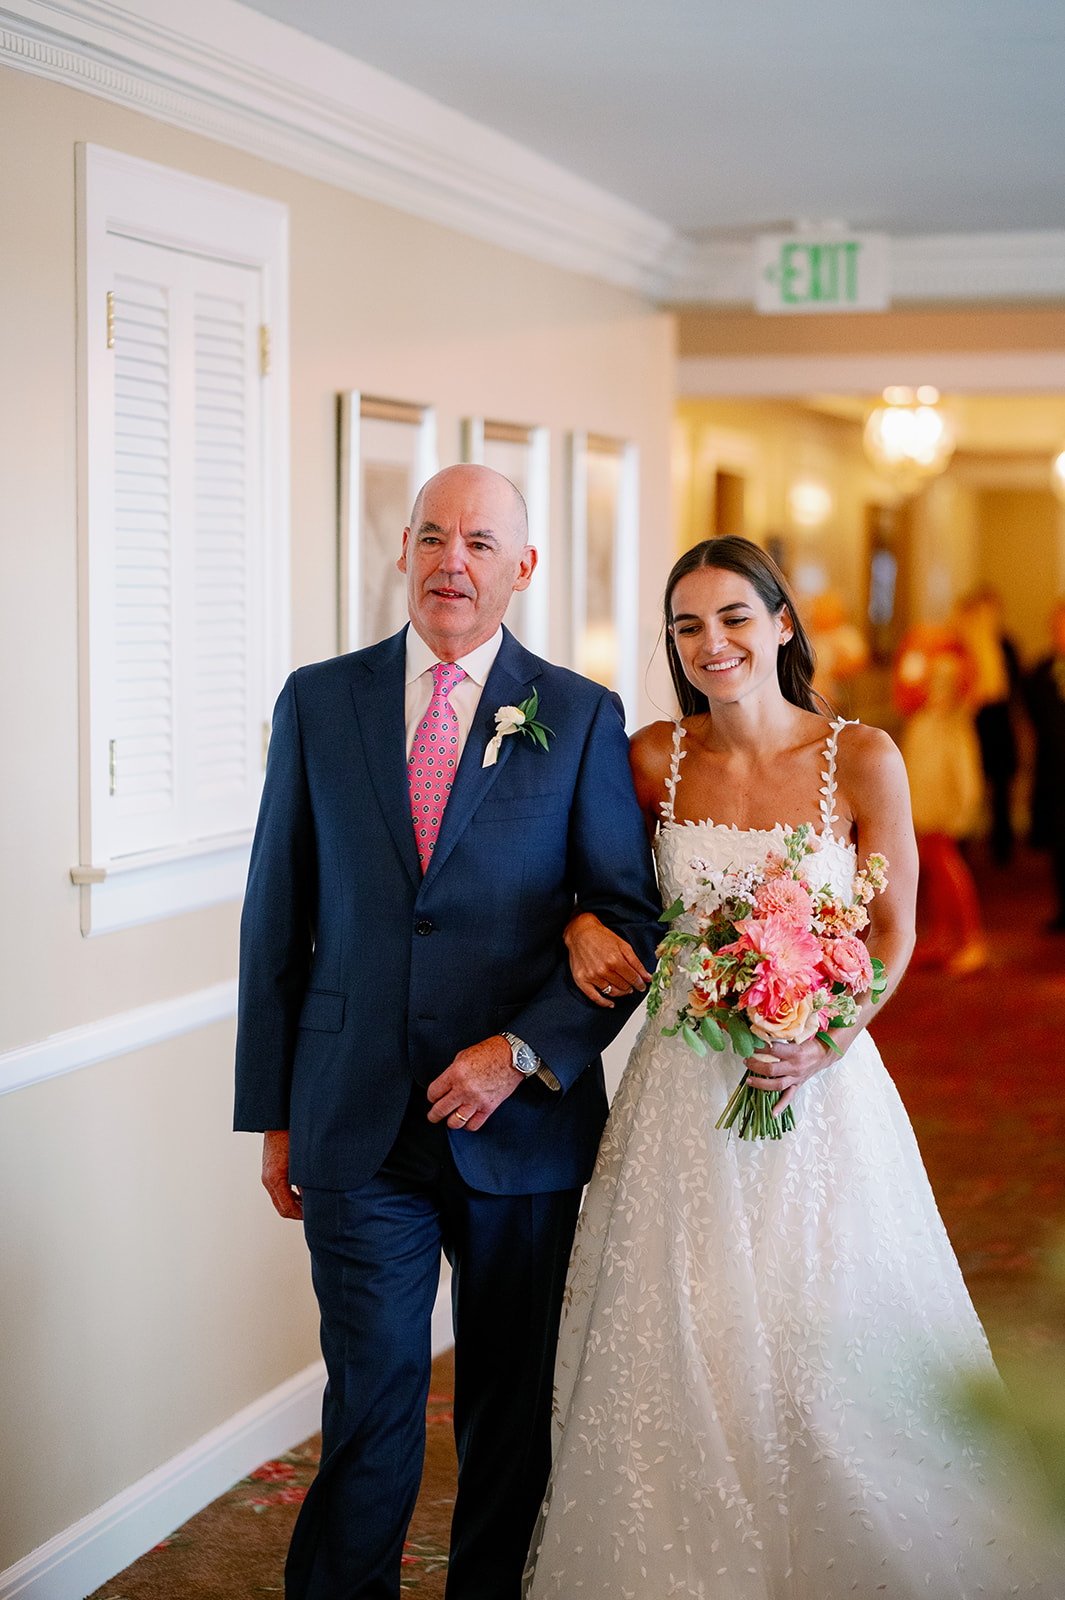 Carly linking arms with her dad getting ready to walk down the aisle.